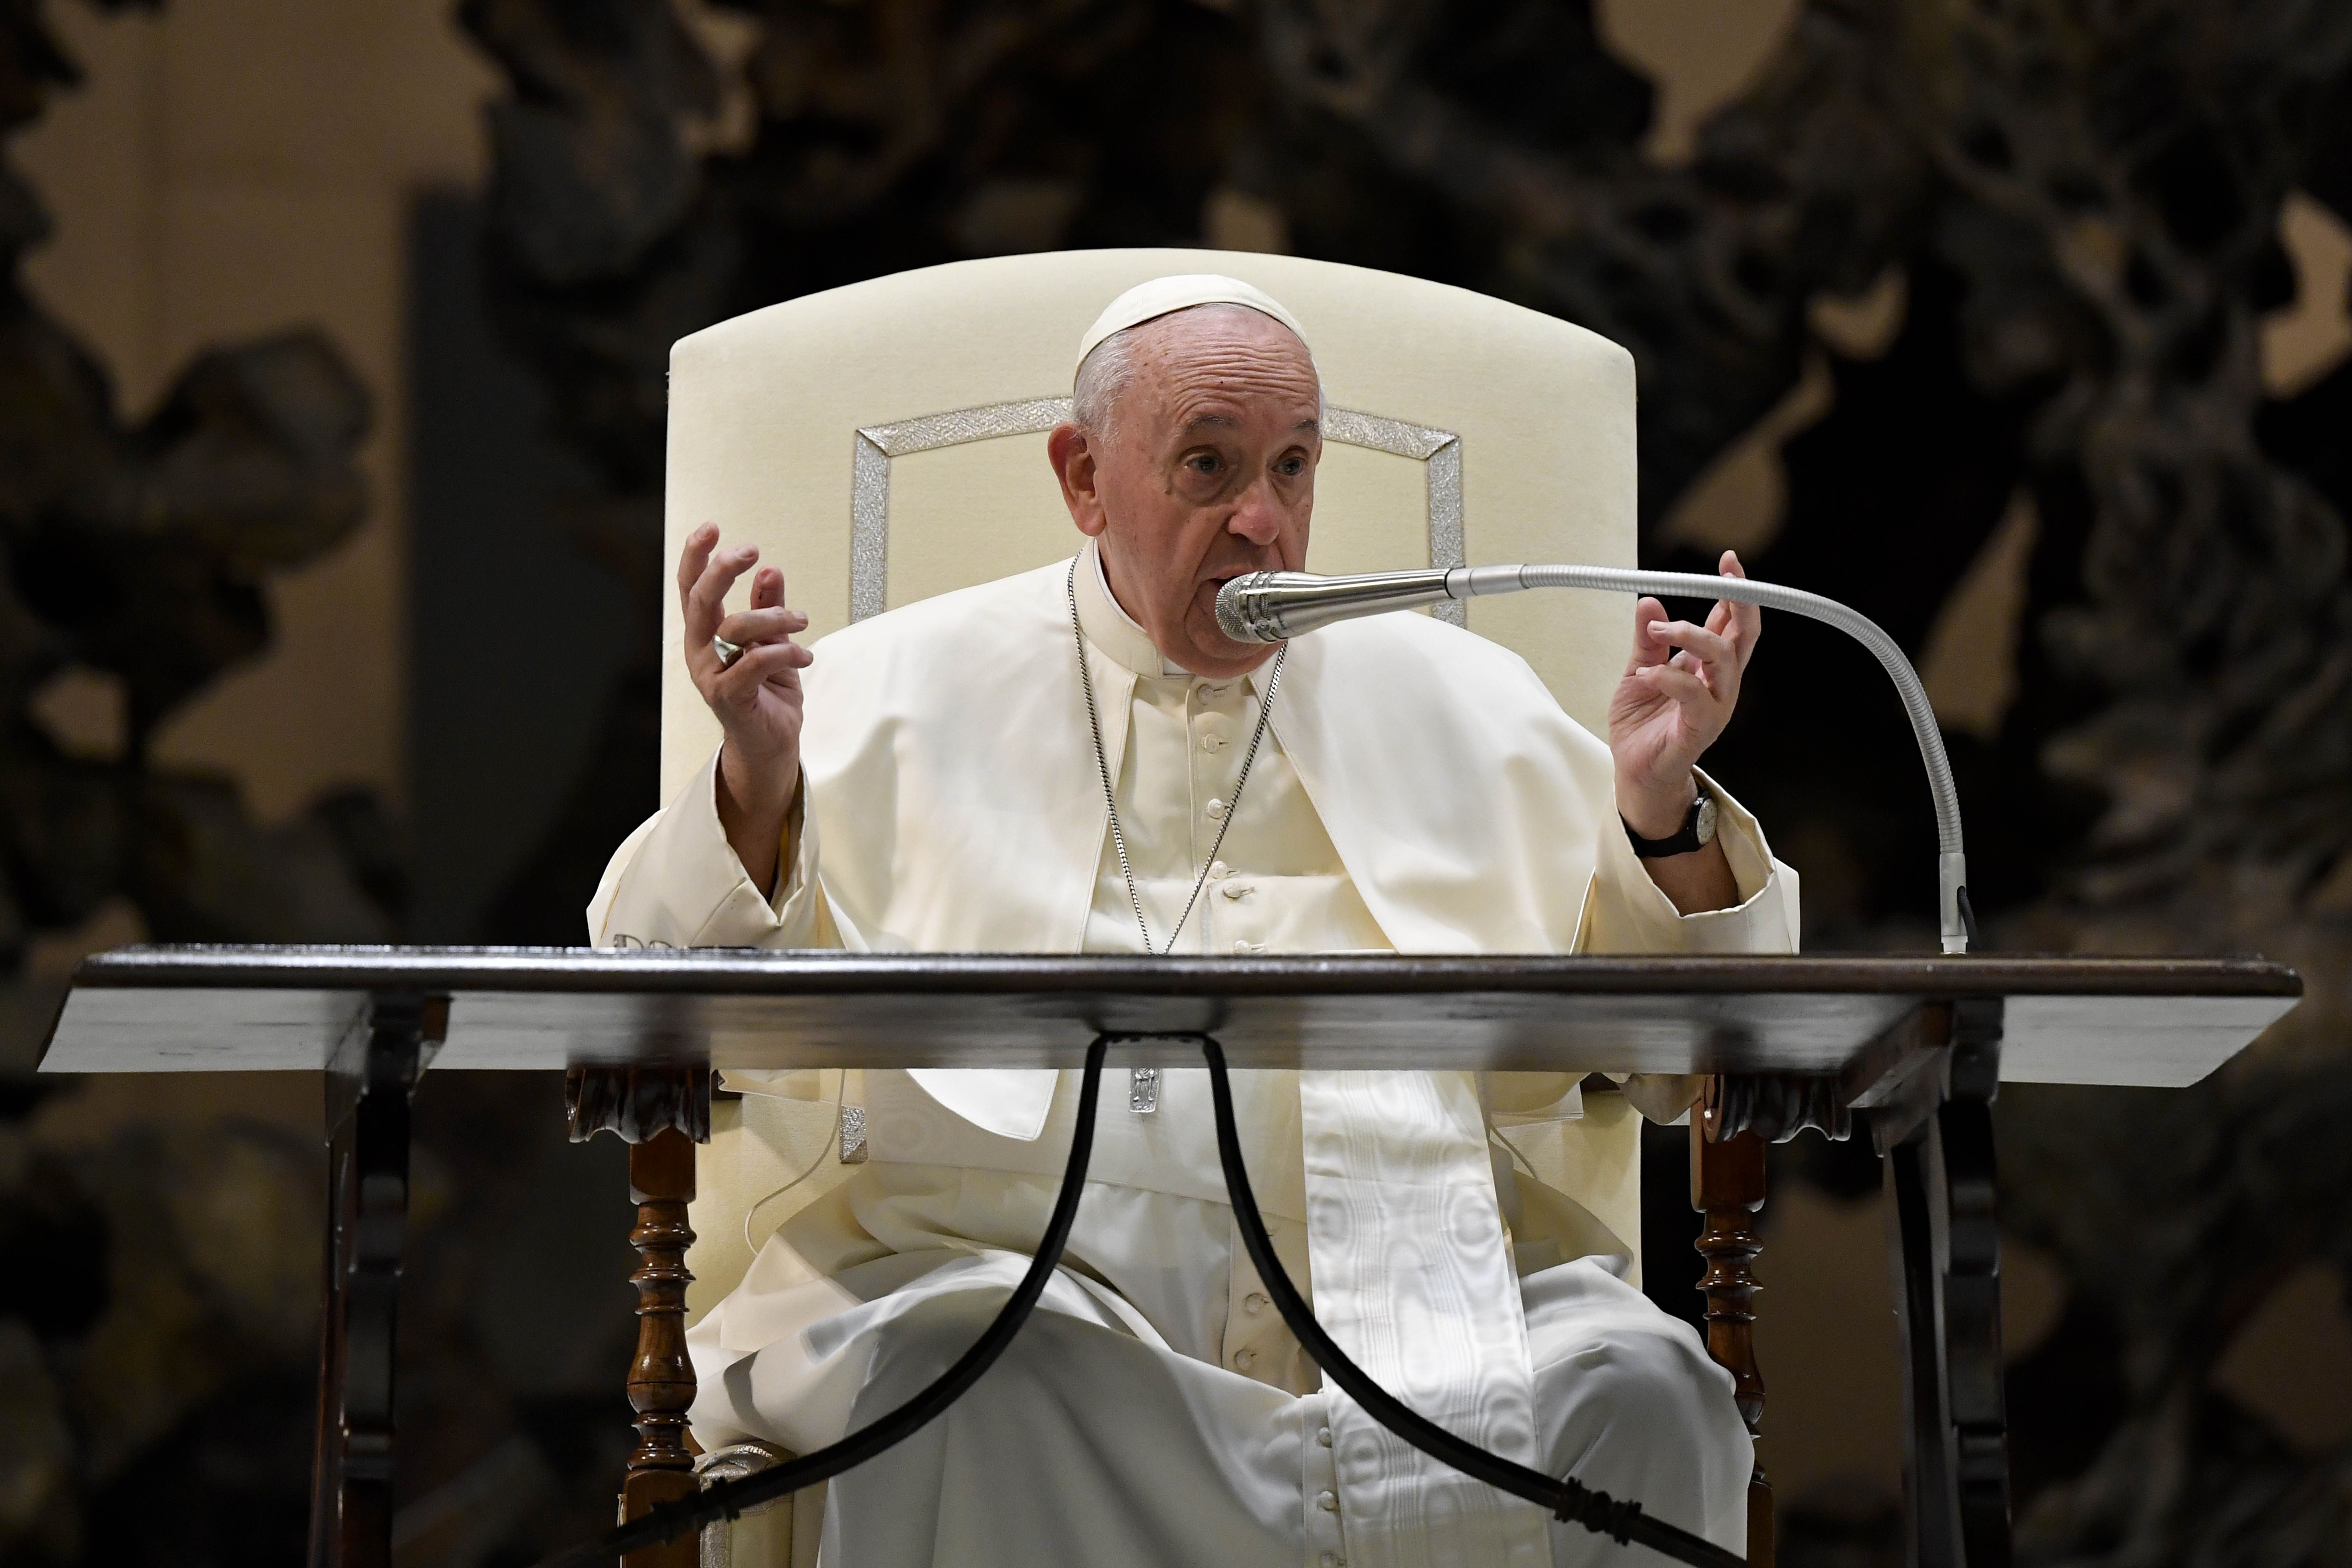 Pope Francis warns seminarians that the vice of pornography ‘weakens the soul’